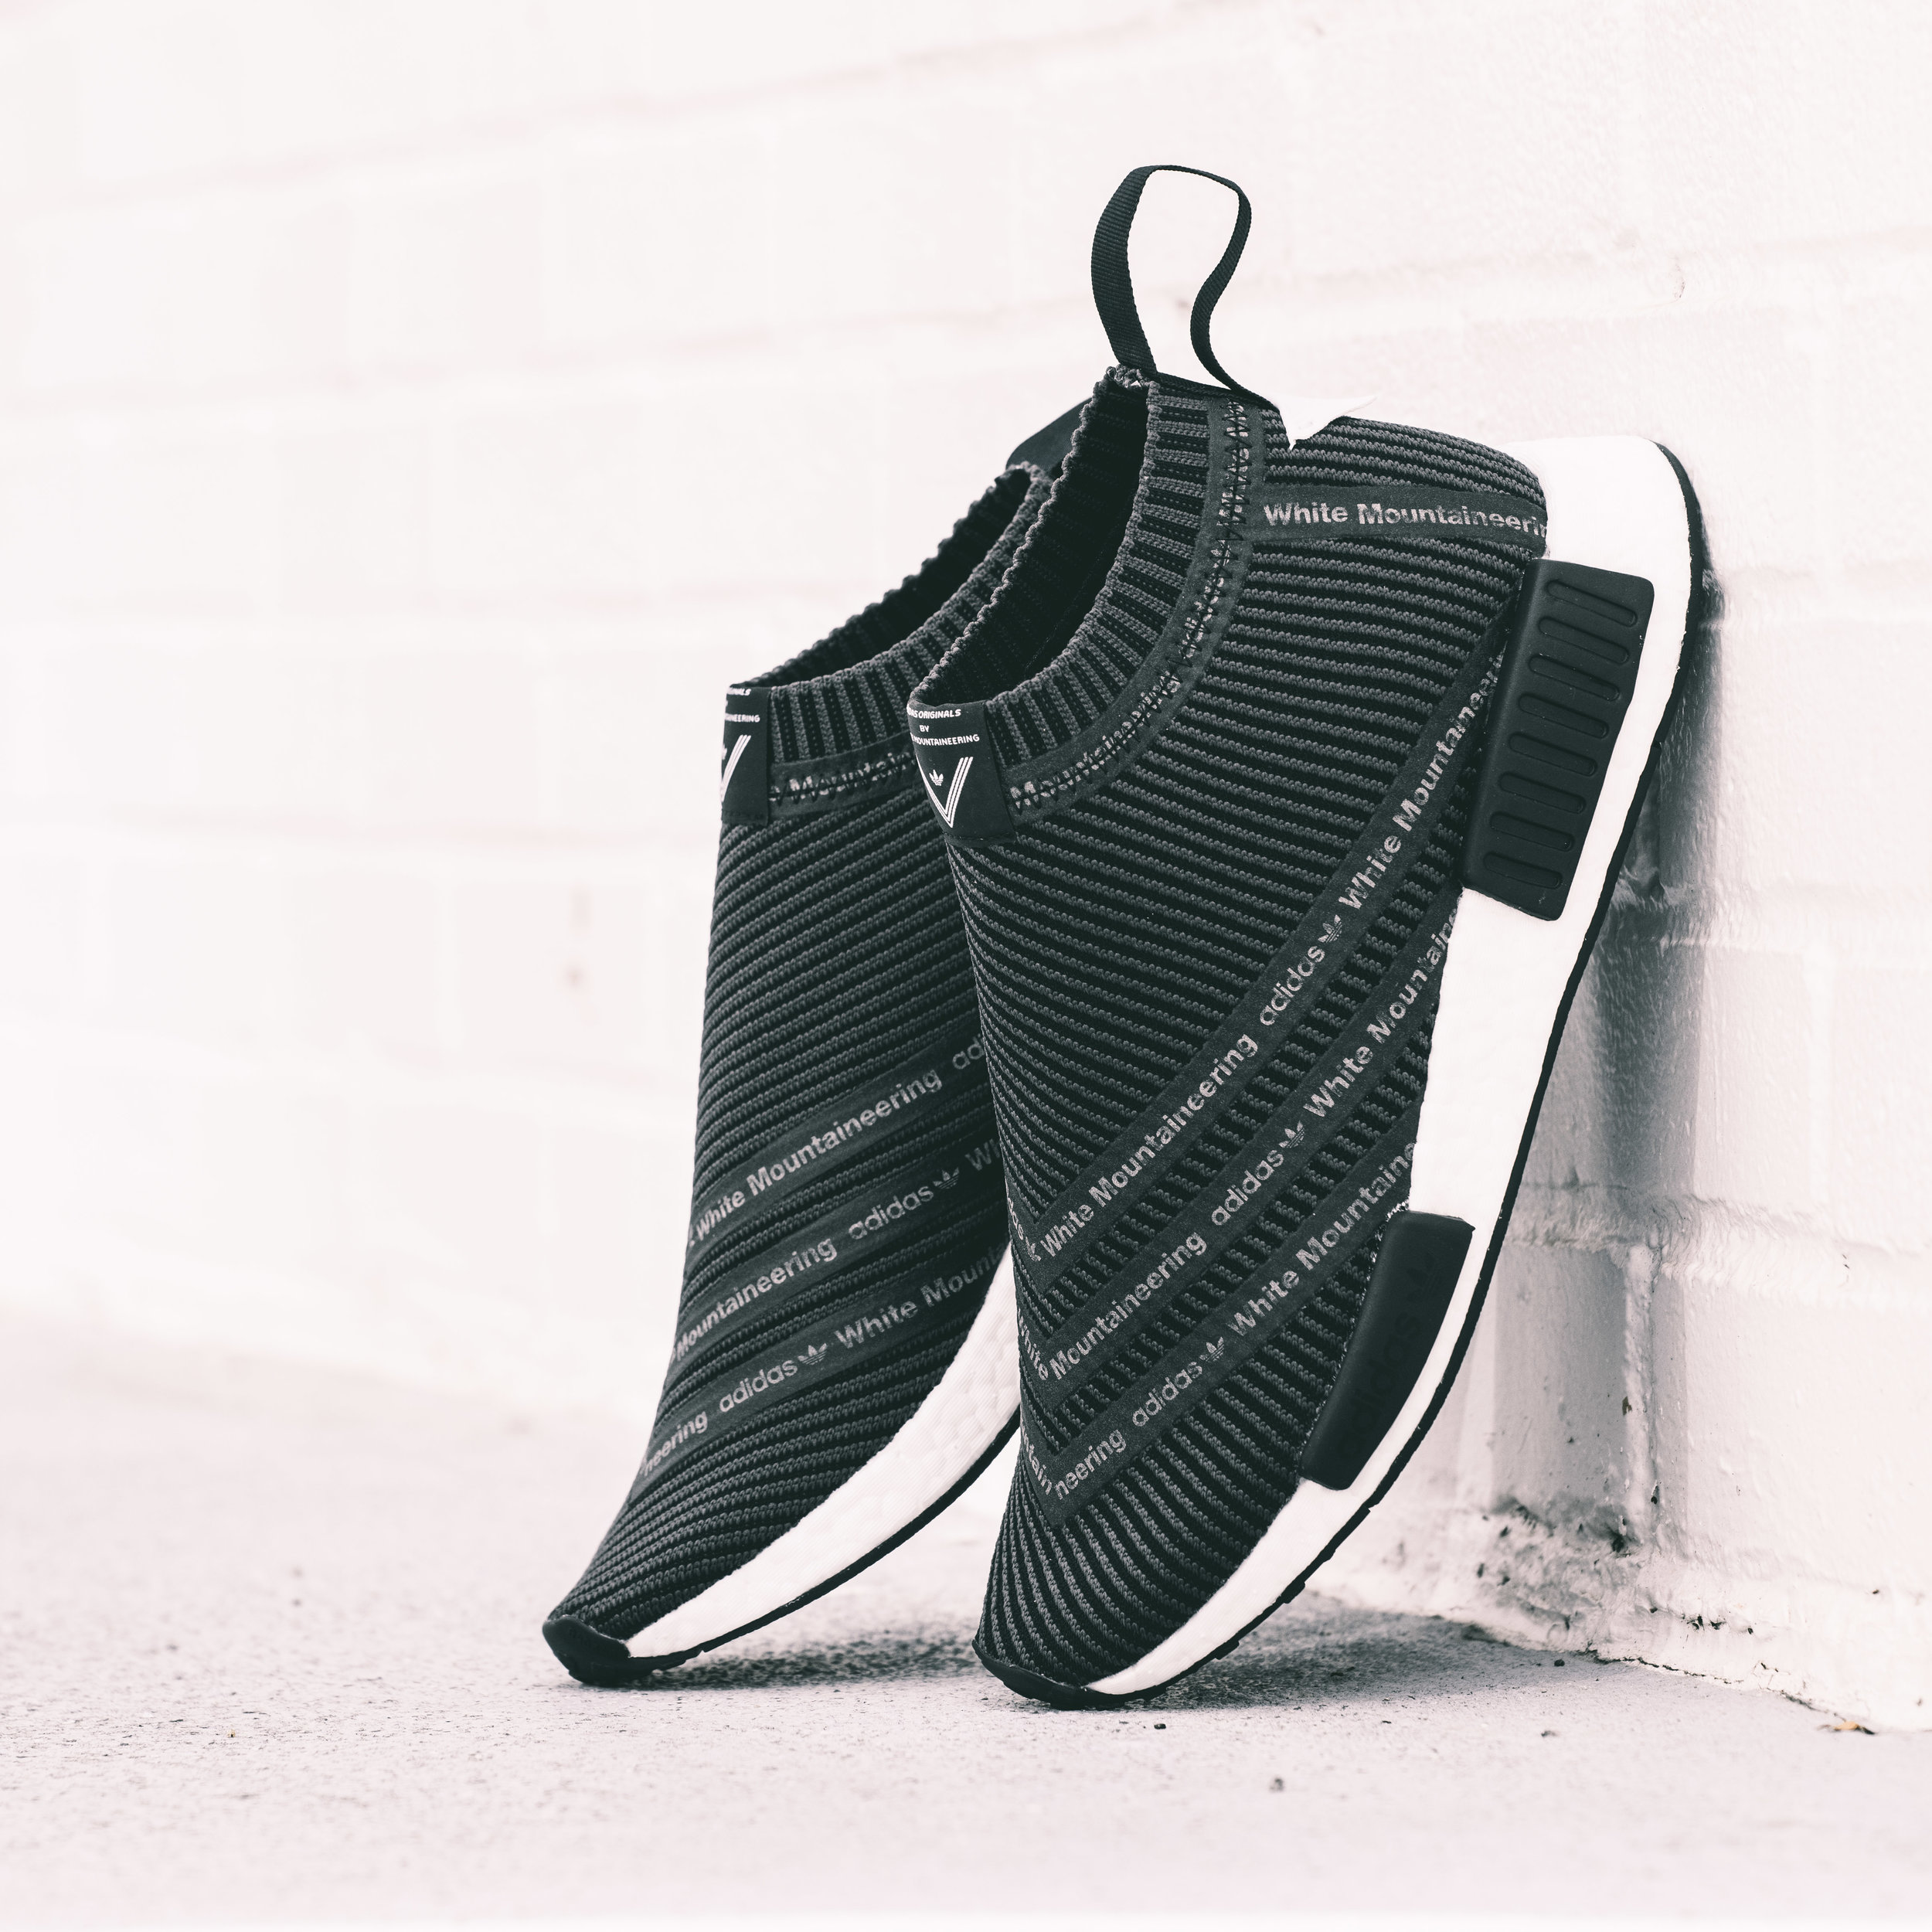 White Mountaineering x Adidas NMD City Sock. — Epitome